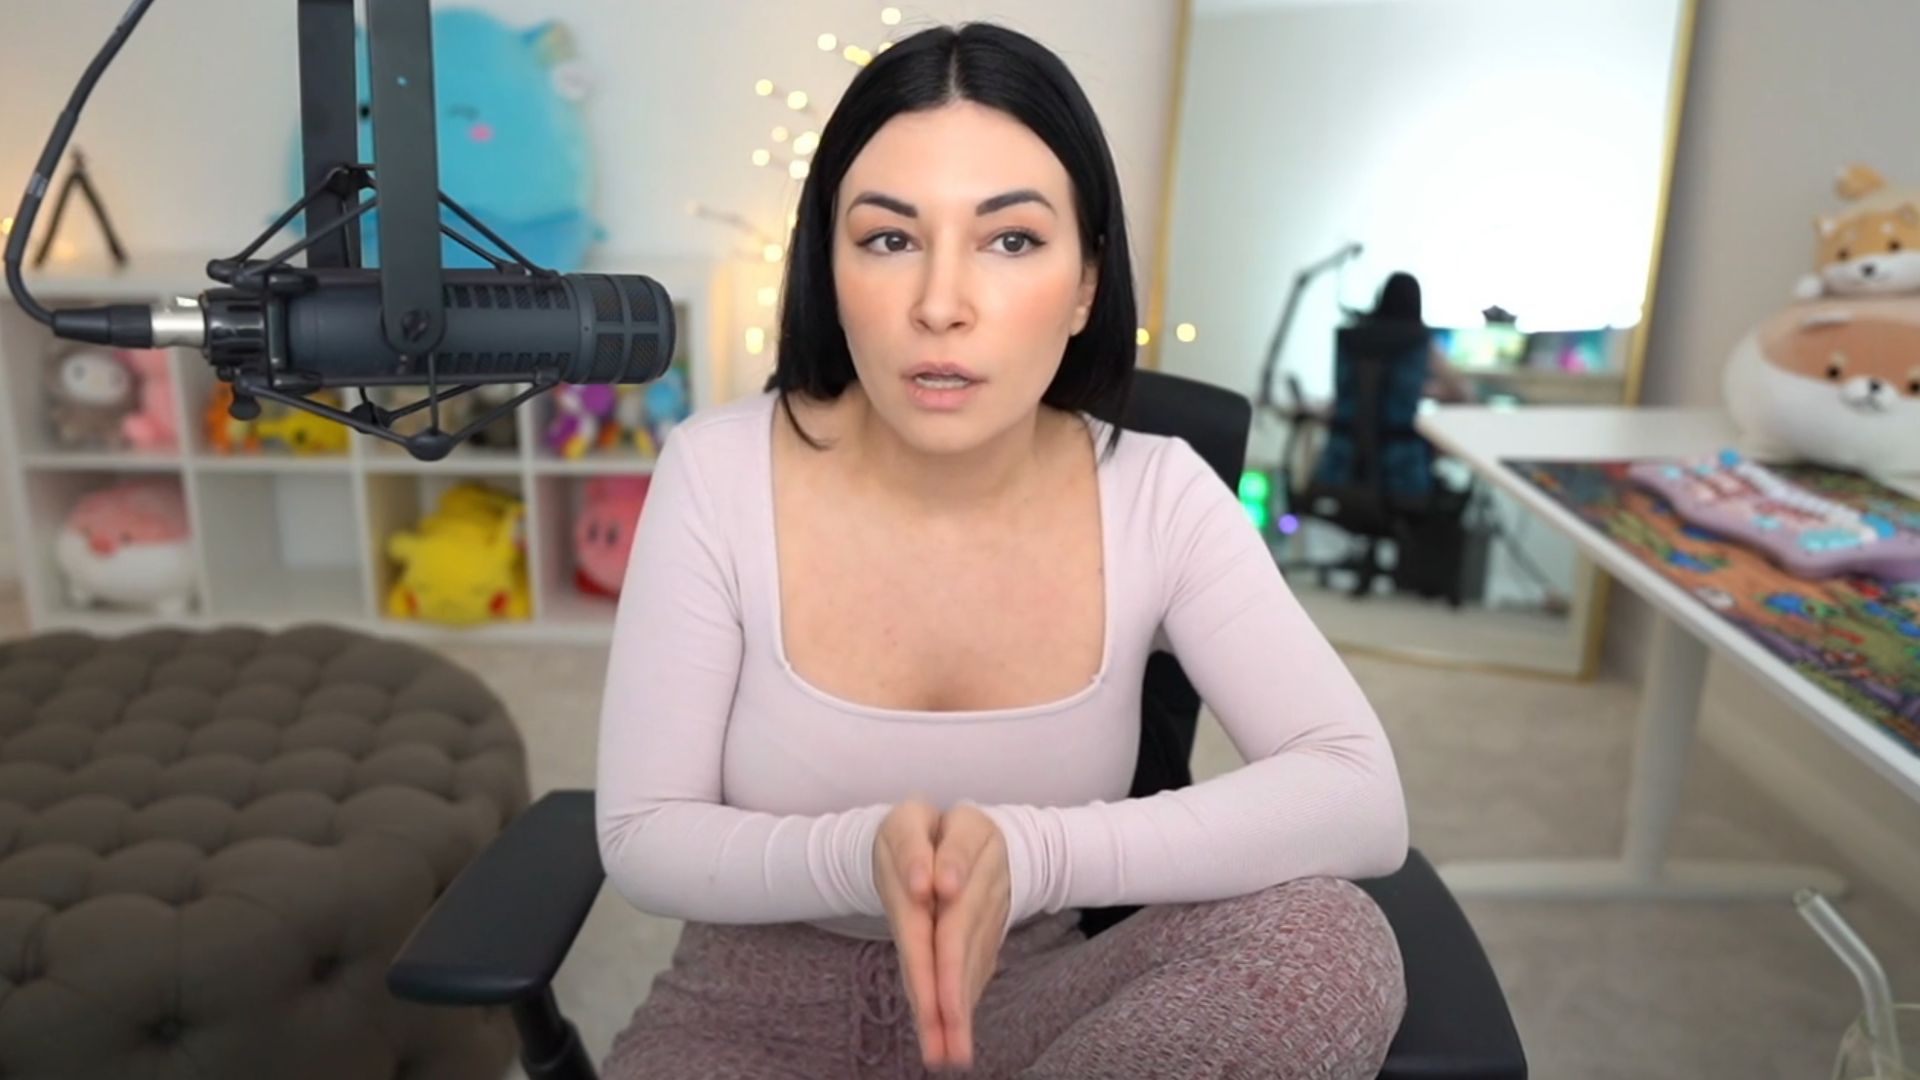 I just worry about her: Alinity reacts to JustAMinx drama 